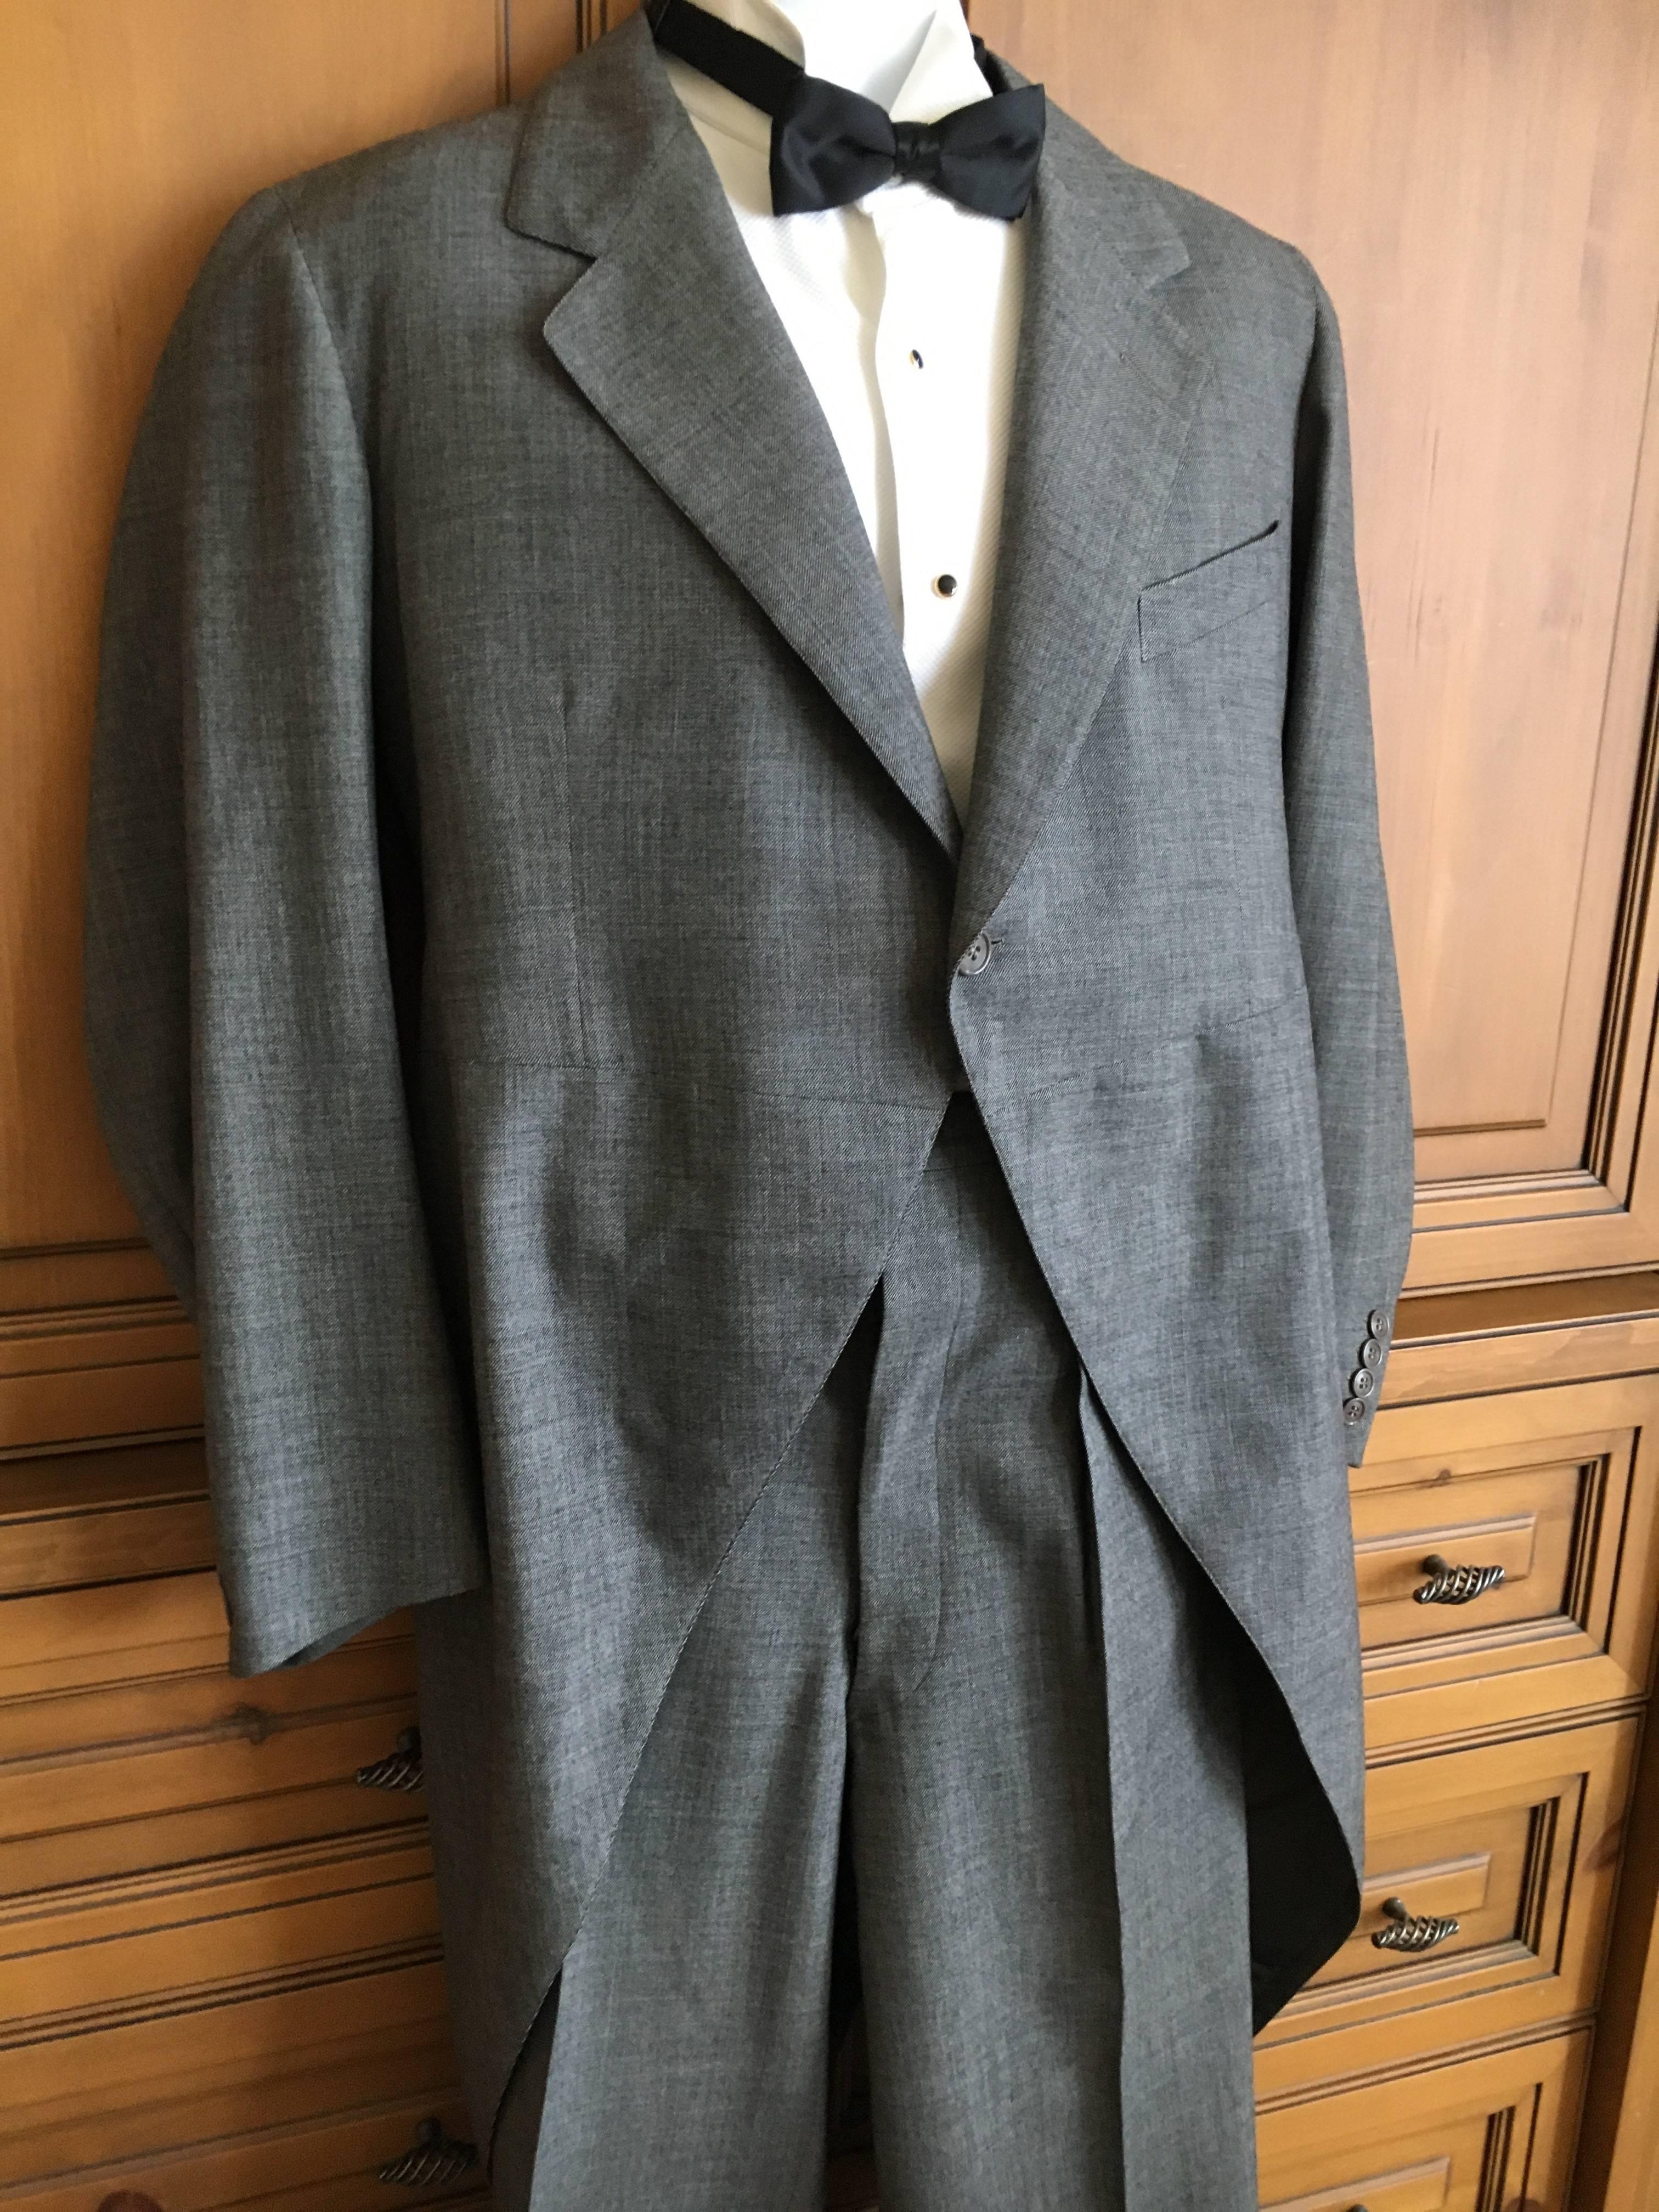 1941 Men's Gray Formal Cutaway Tailcoat Suit Dunne & Co. 3